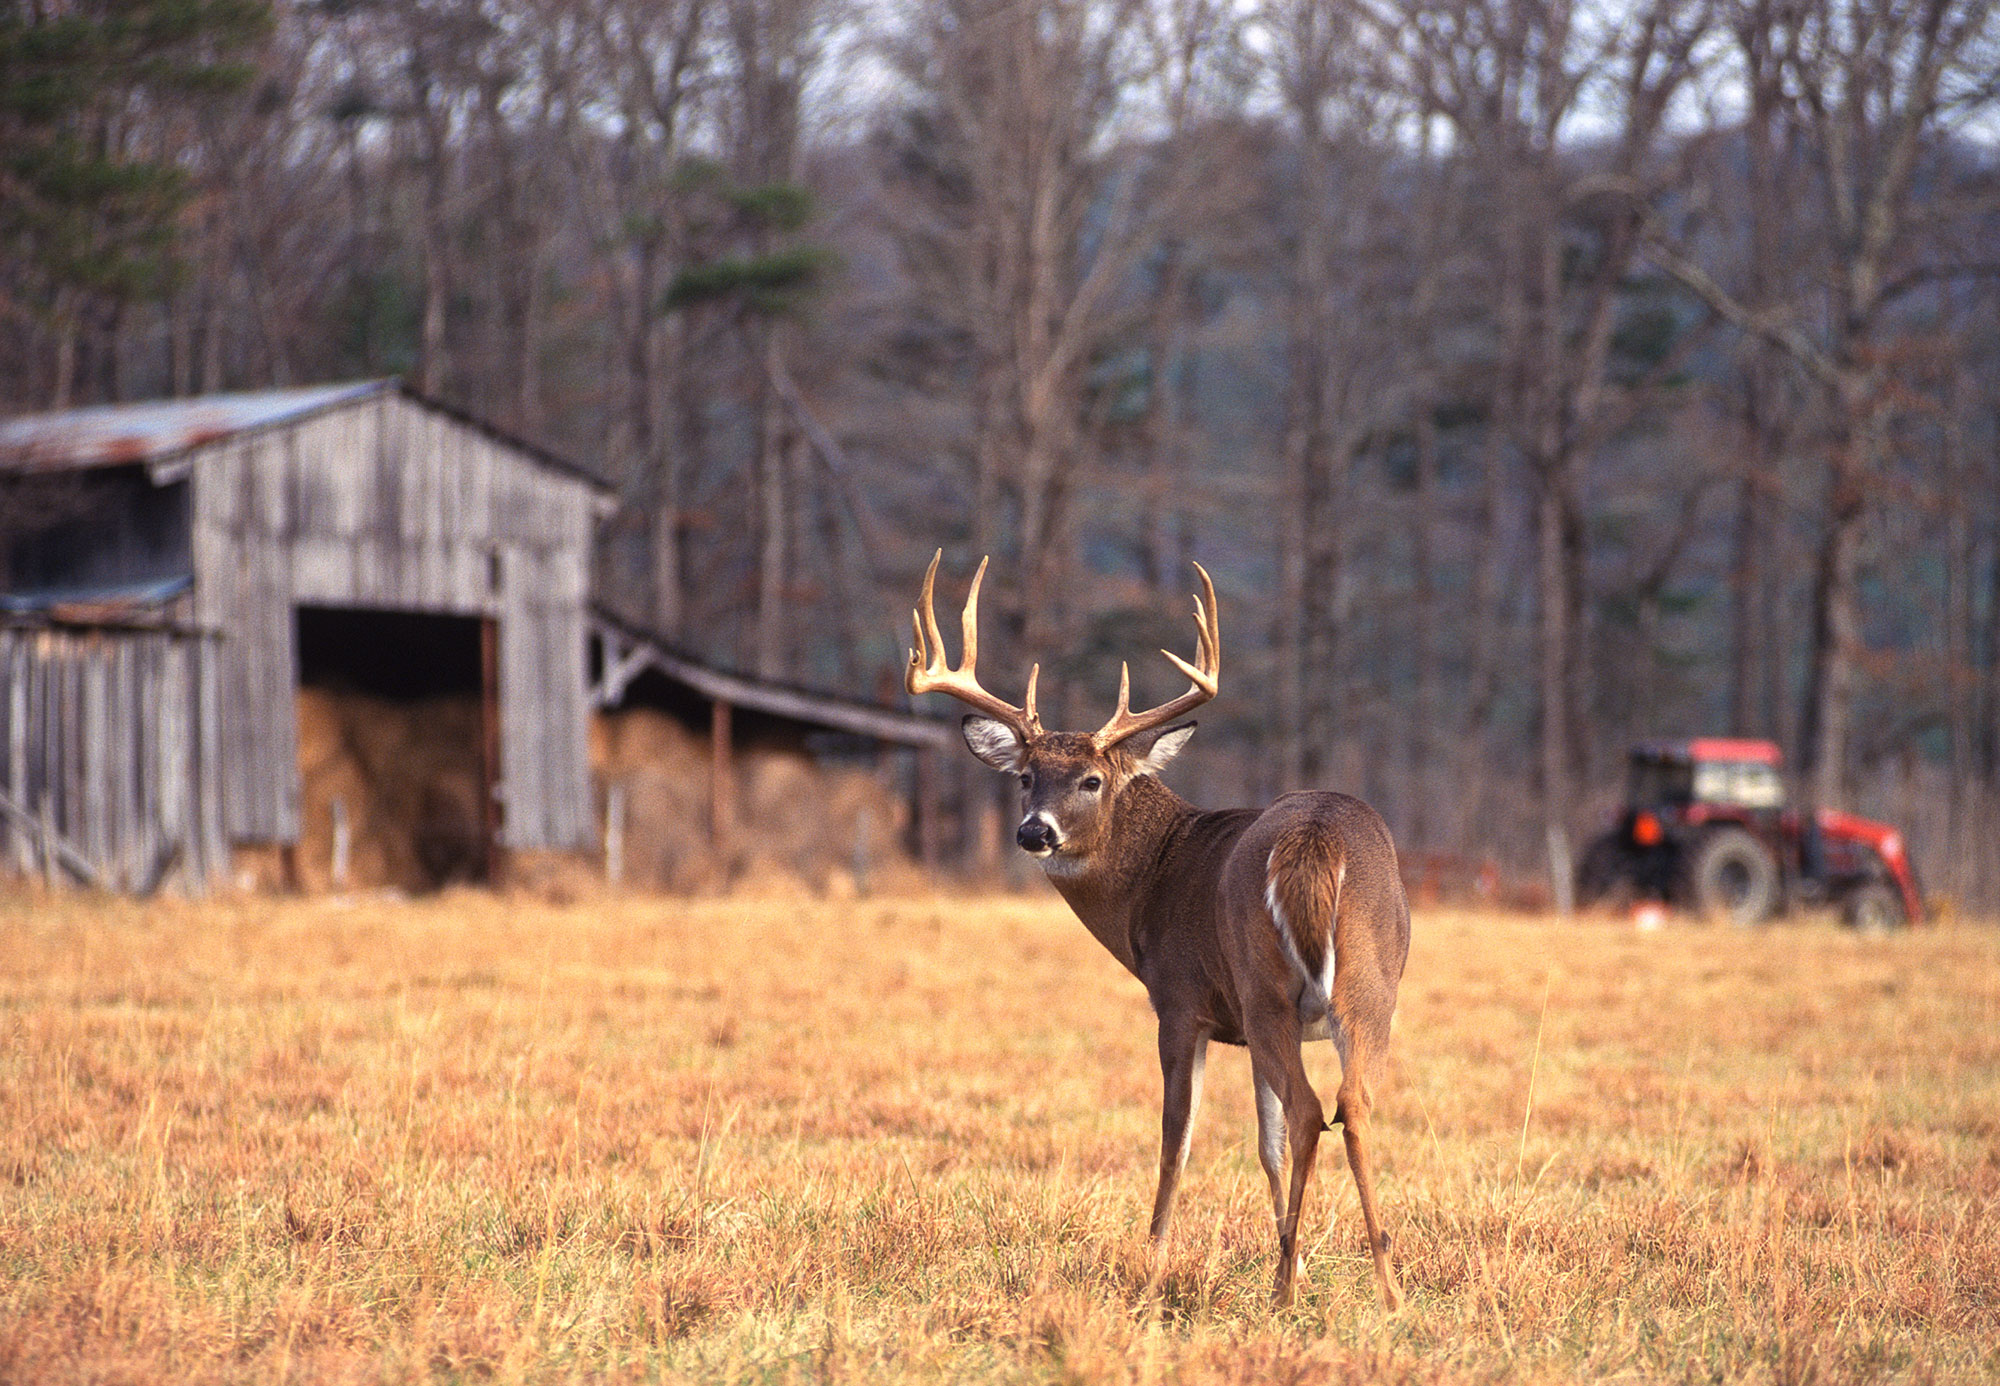 9 Out of Every 10 Harvested Whitetails Are Taken on Private Land. Here’s What That Means for Deer Hunting in America